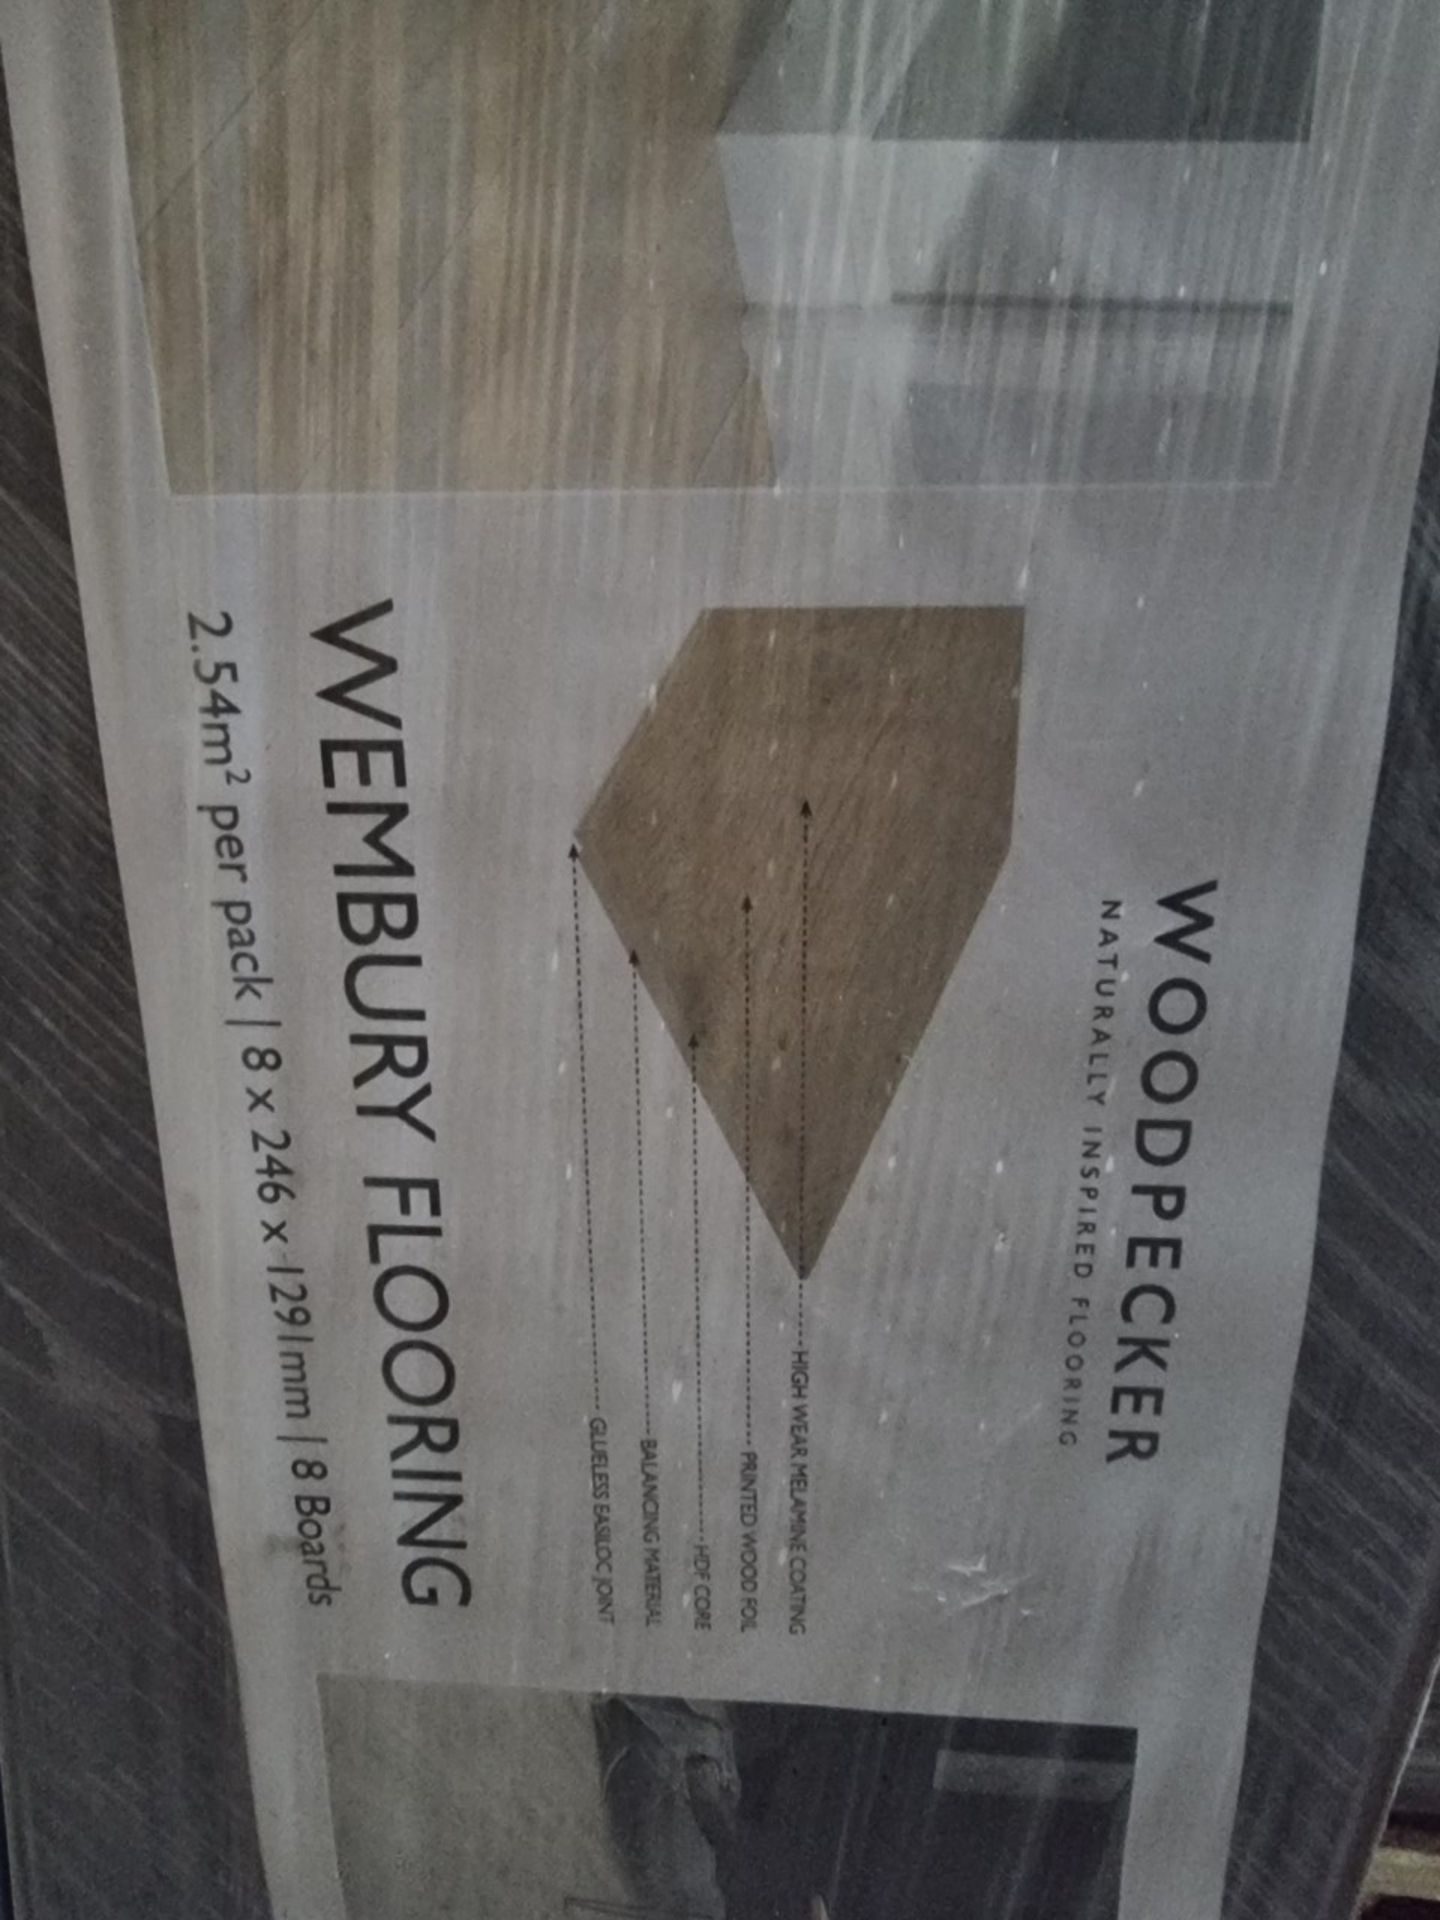 10 X NEW PACKS OF WEMBURY DUSTY OAK. LAMINATE FLOORING. 8MM. EACH PACK CONTAINS 2.54m2, GIVING - Image 2 of 3